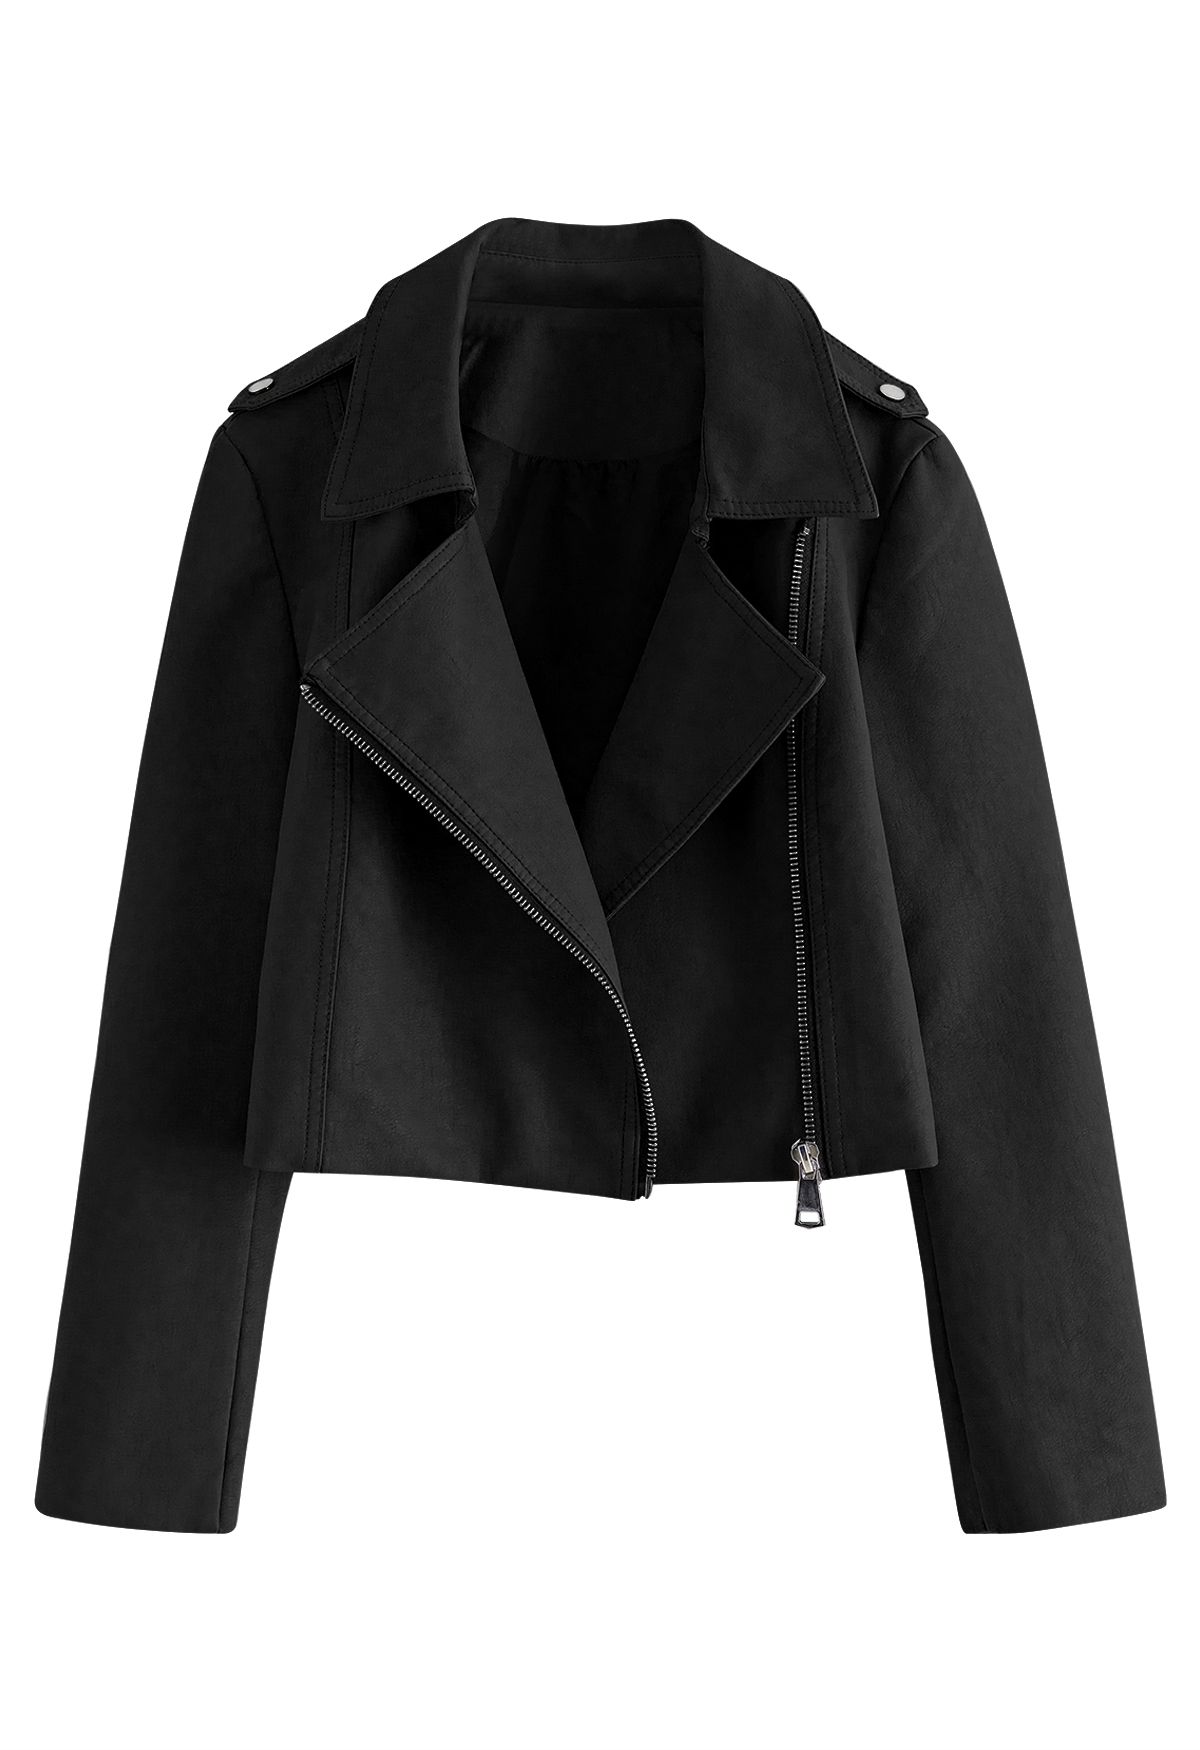 Edgy Faux Leather Moto Jacket in Black - Retro, Indie and Unique Fashion